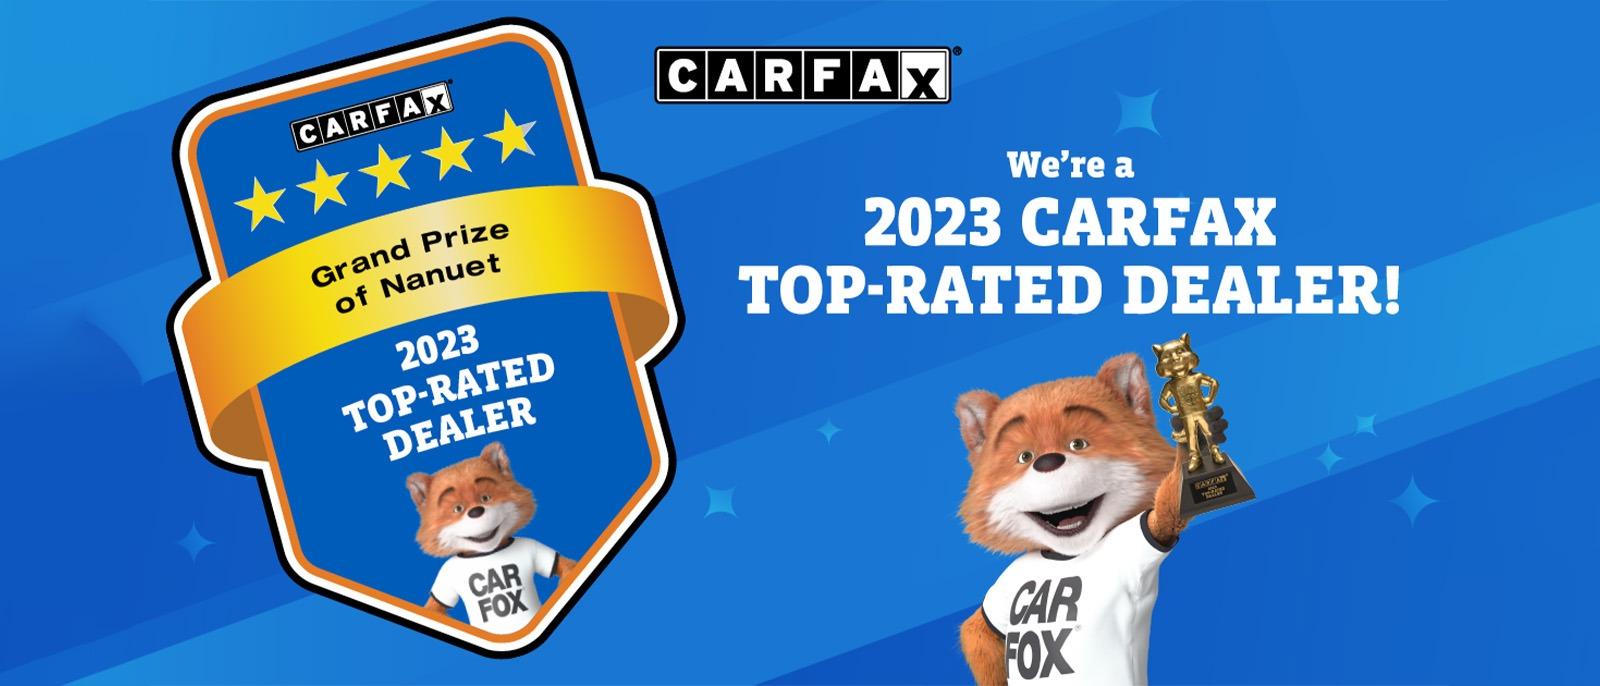 We're a 2023 Carfax Top-Rated Dealer!